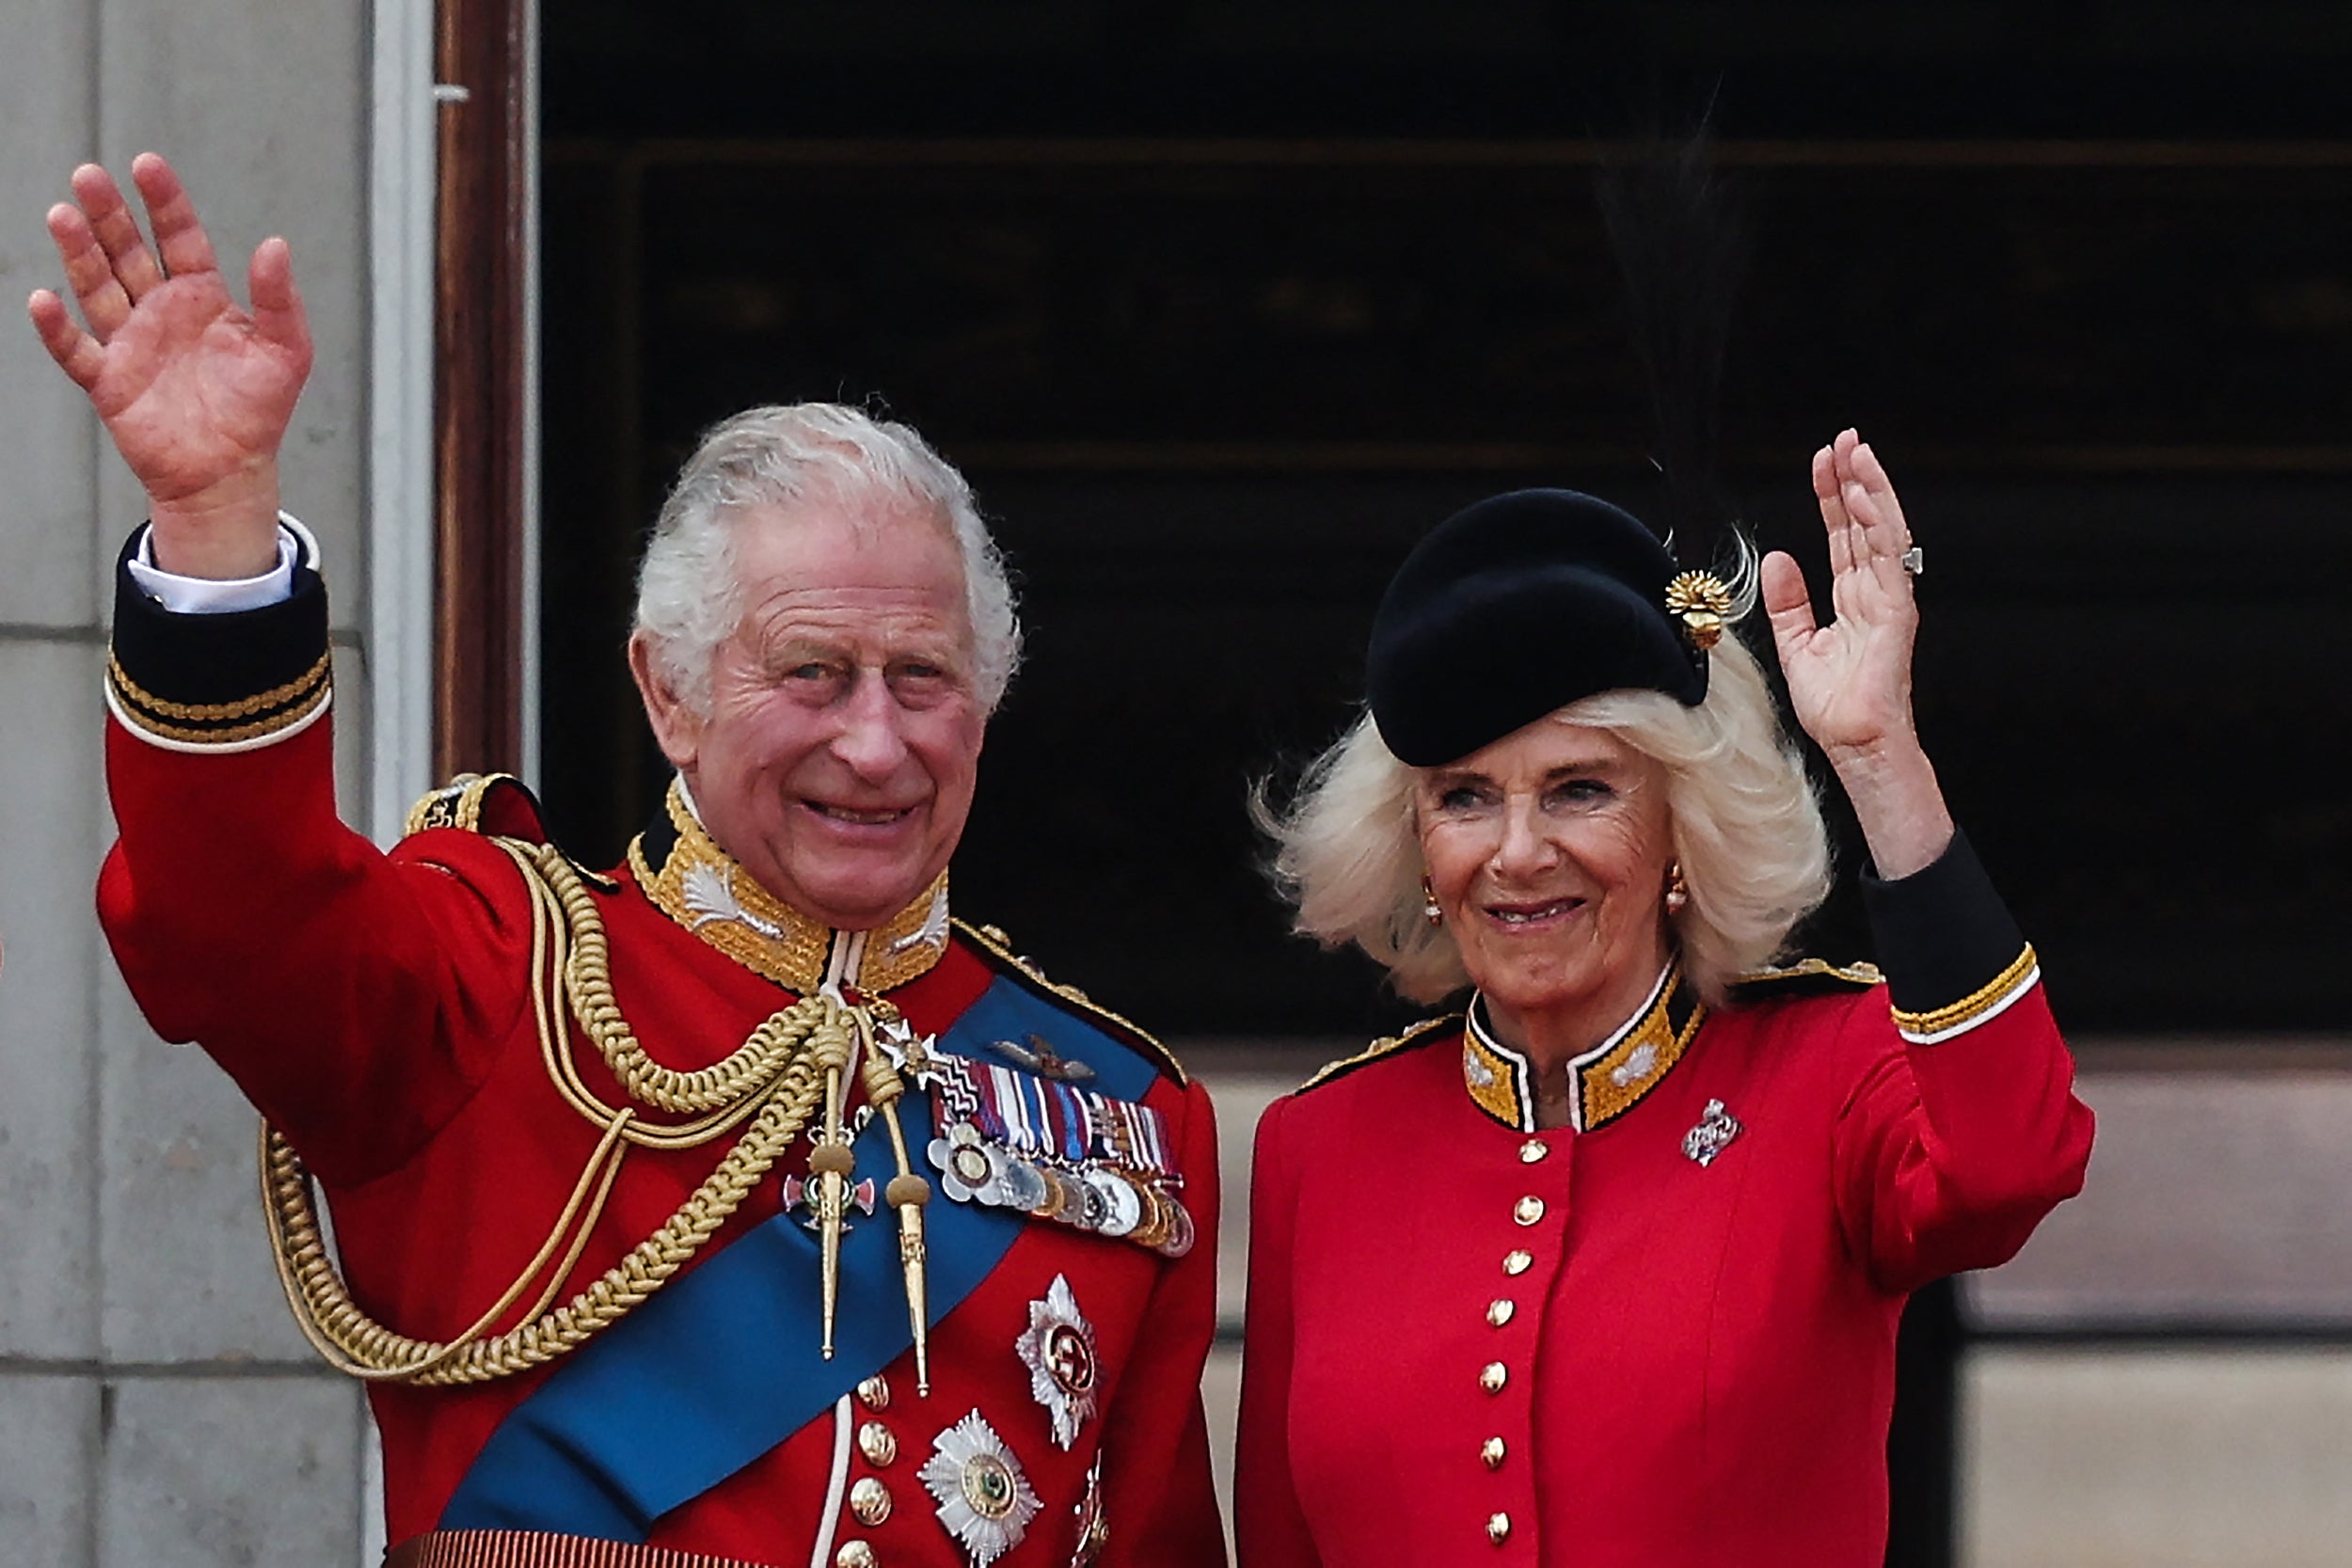 Only King Charles and Queen Camilla’s attendance has been confirmed so far